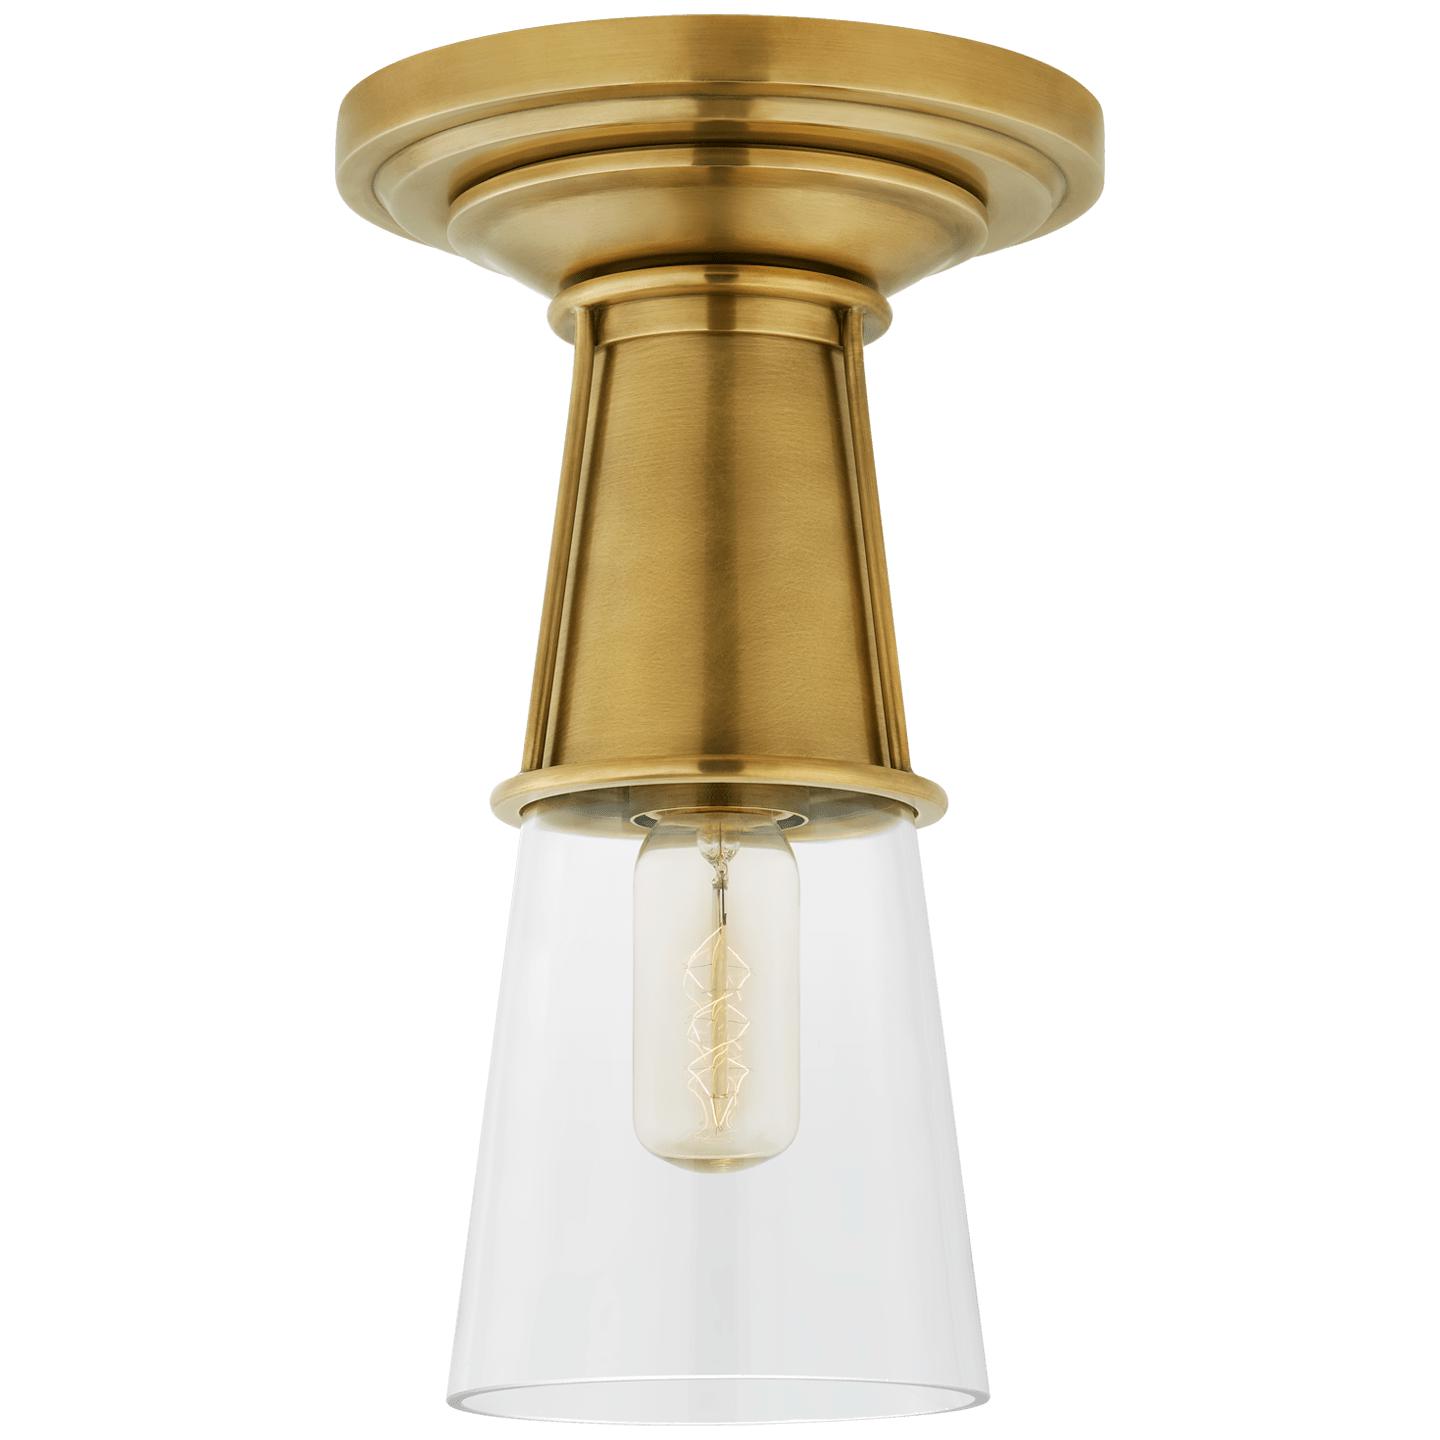 Hand-Rubbed Antique Brass Clear Glass